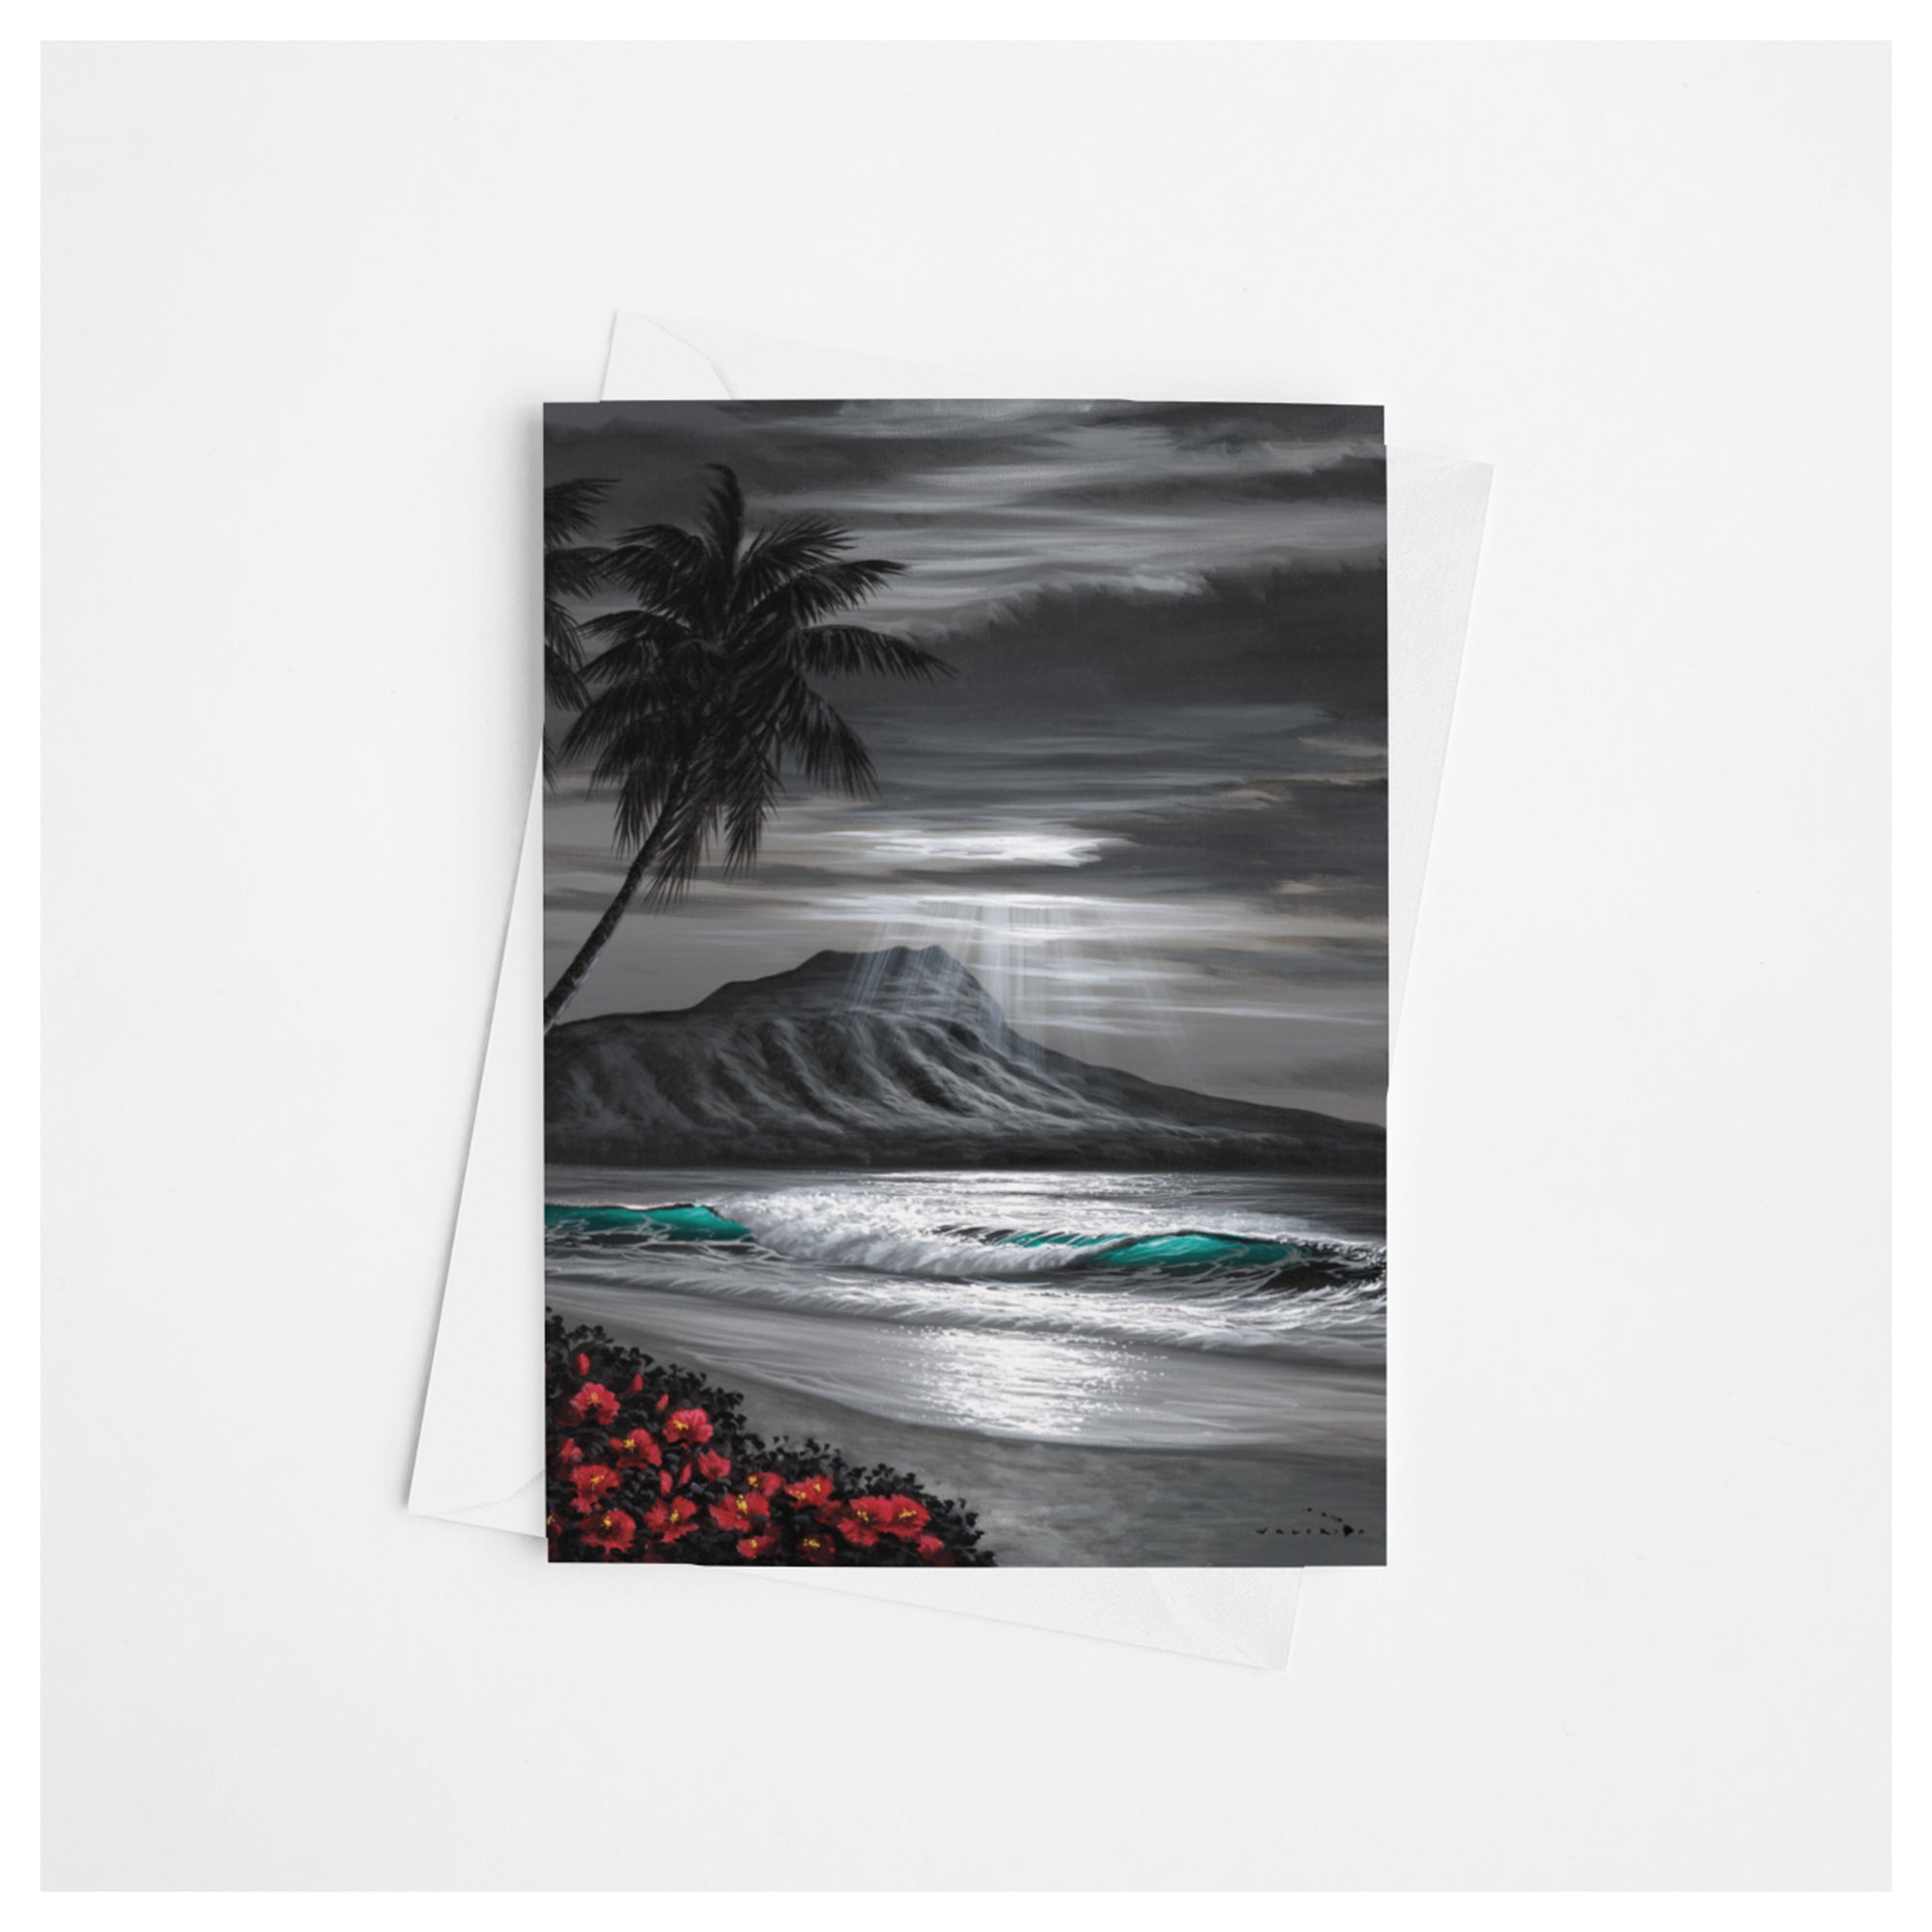 A greeting card that features a black and white, with pops of color, view of the famous Diamond Head Crater on Oahu by Hawaii artist Walfrido Garcia